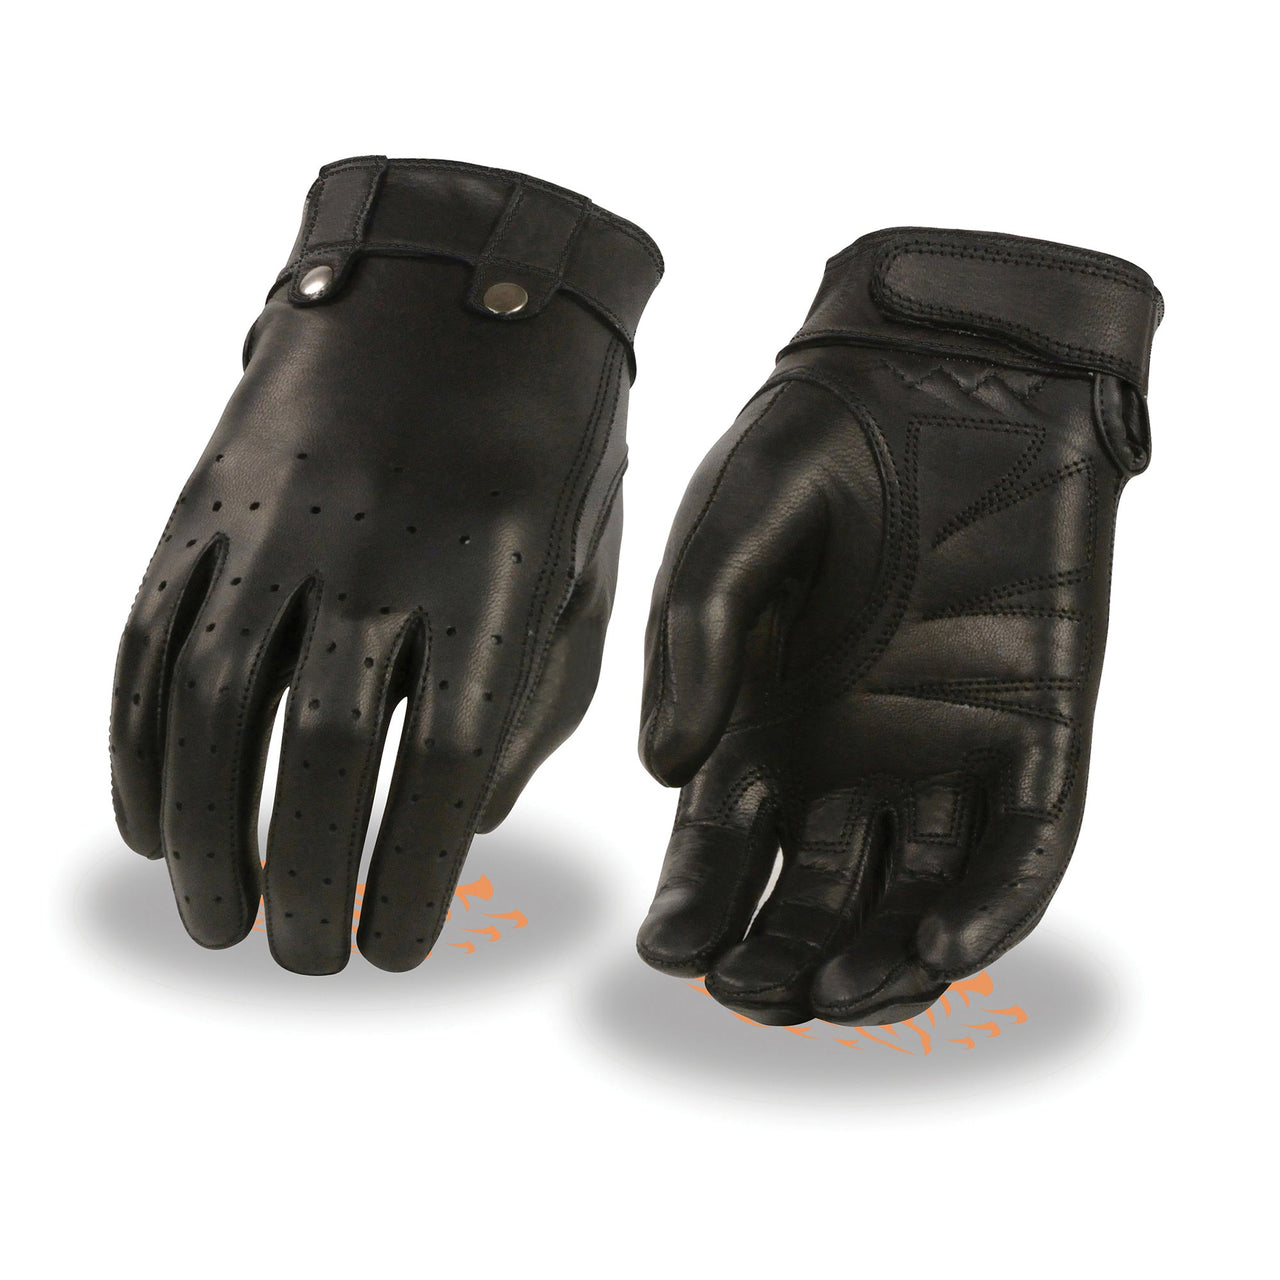 Ladies Leather Driving Glove w/ Perforated Fingers, Gel Palm - HighwayLeather